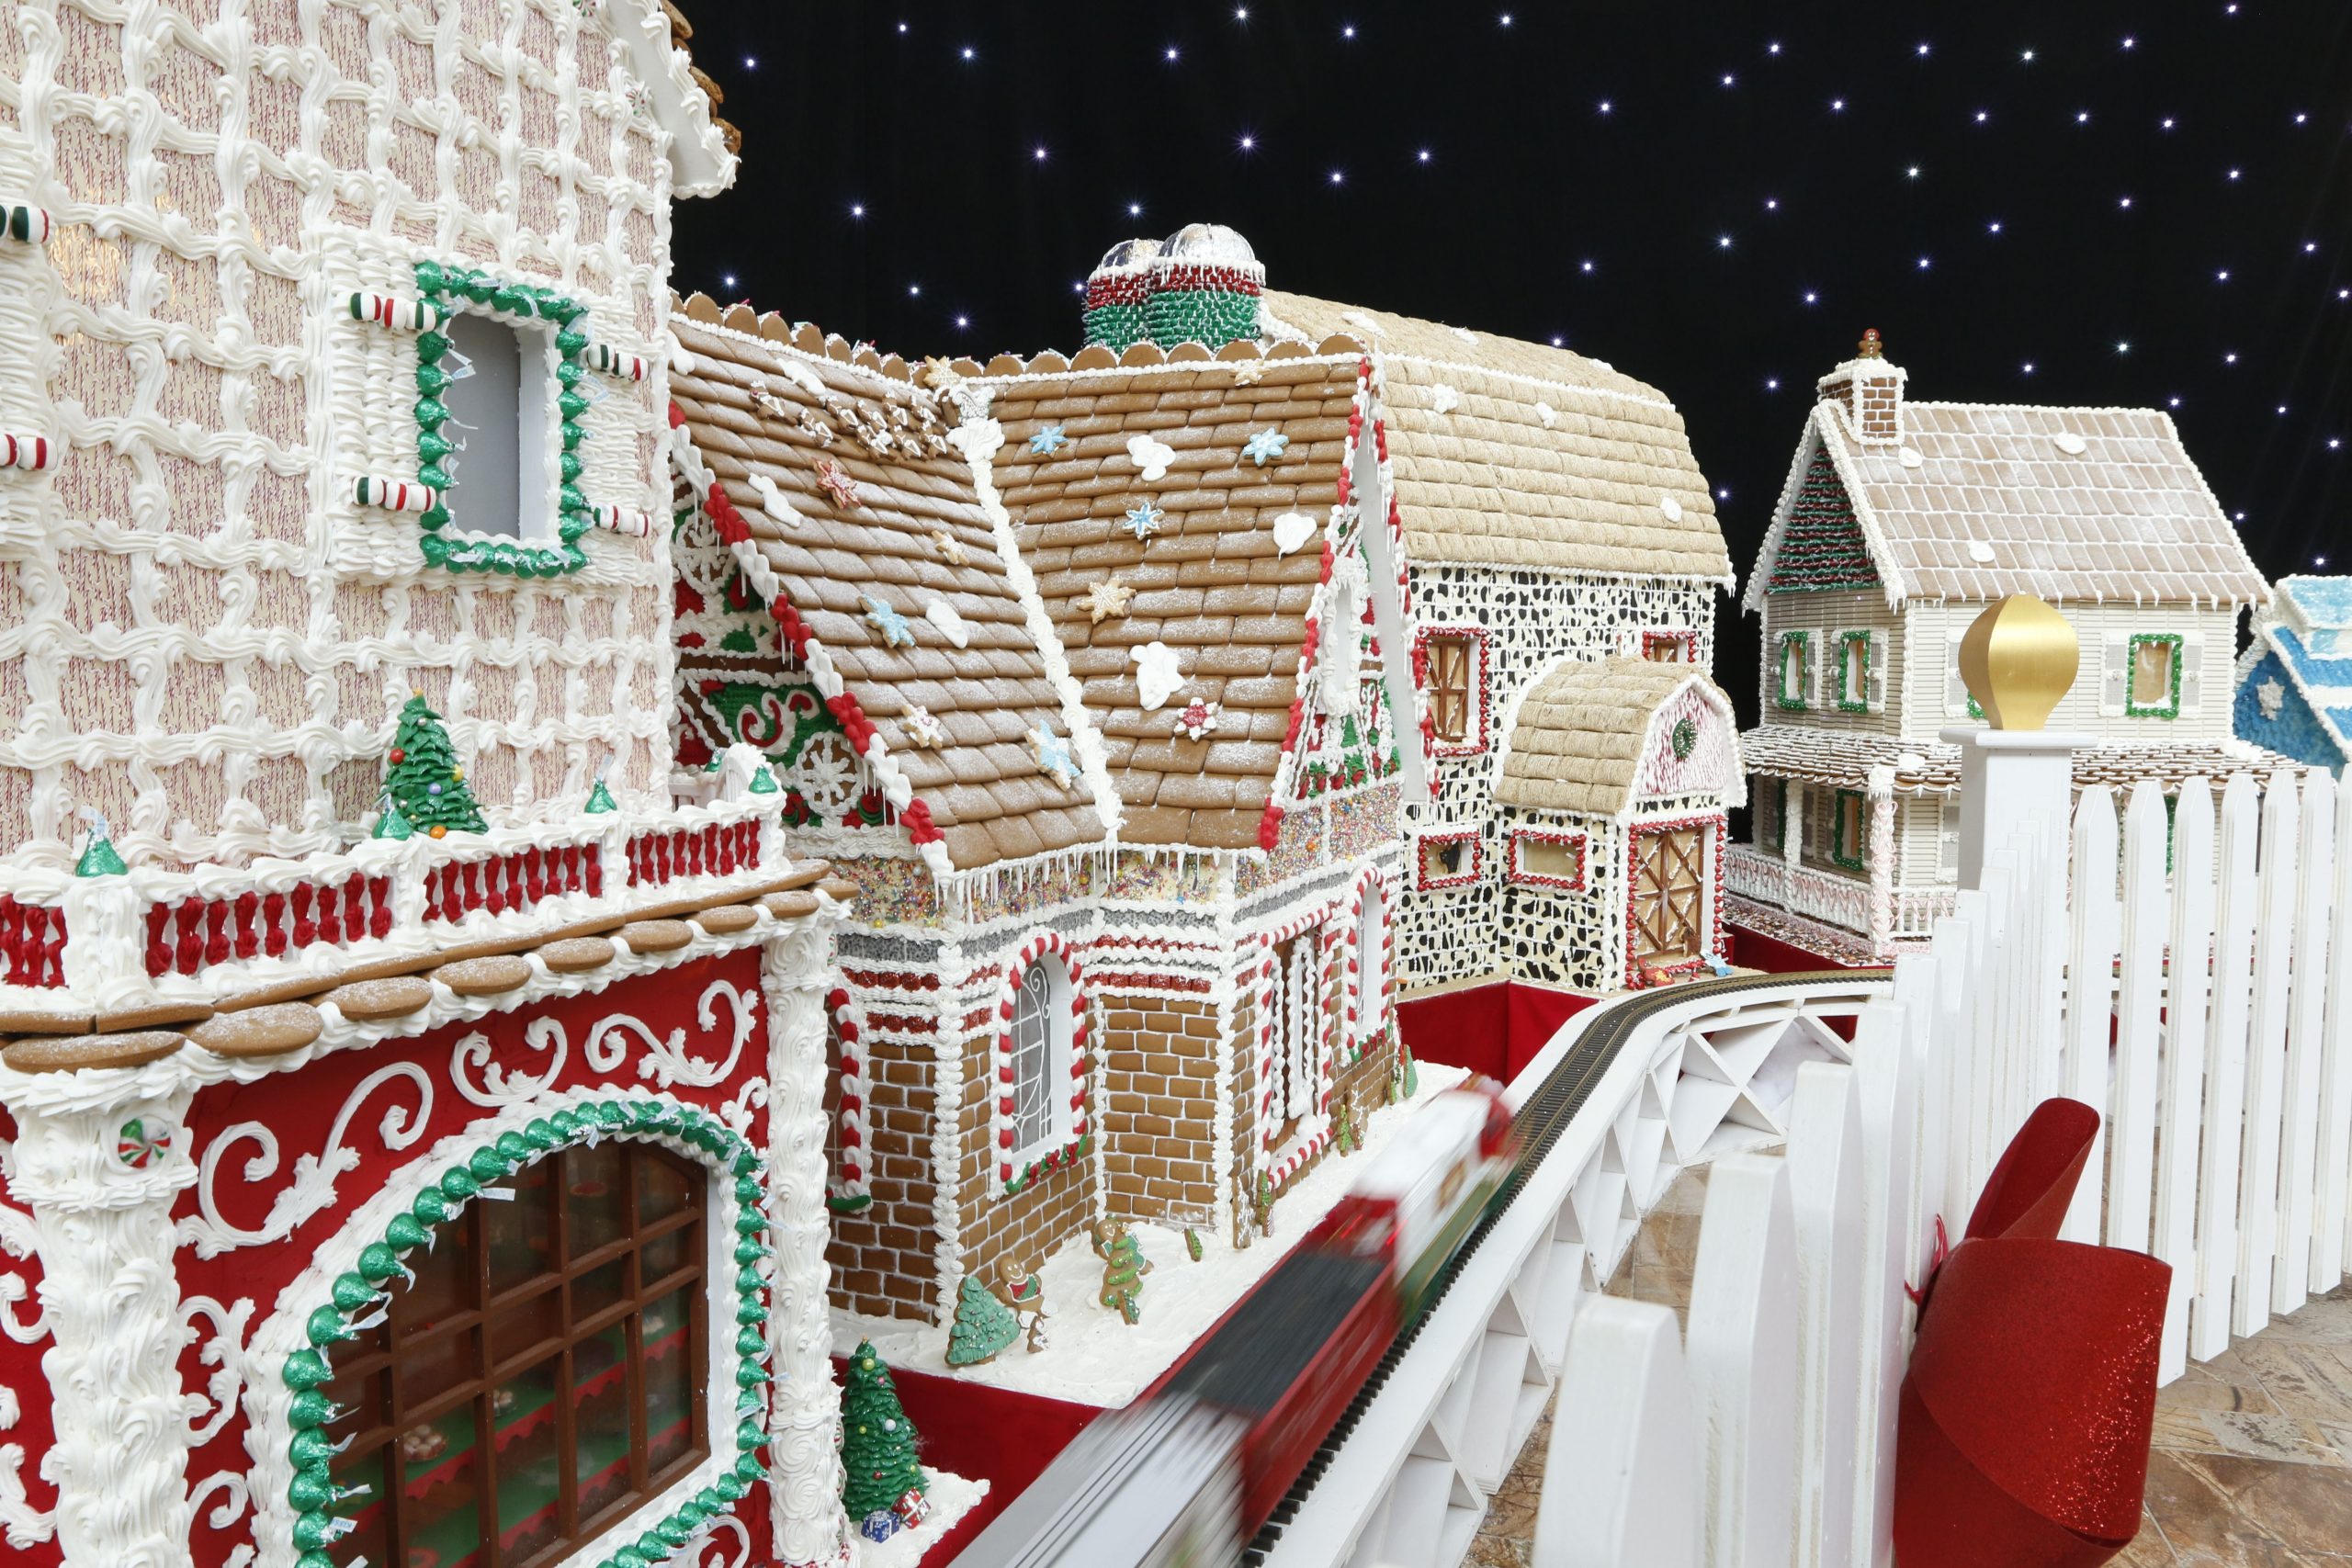 gingerbread houses at turning stone casino